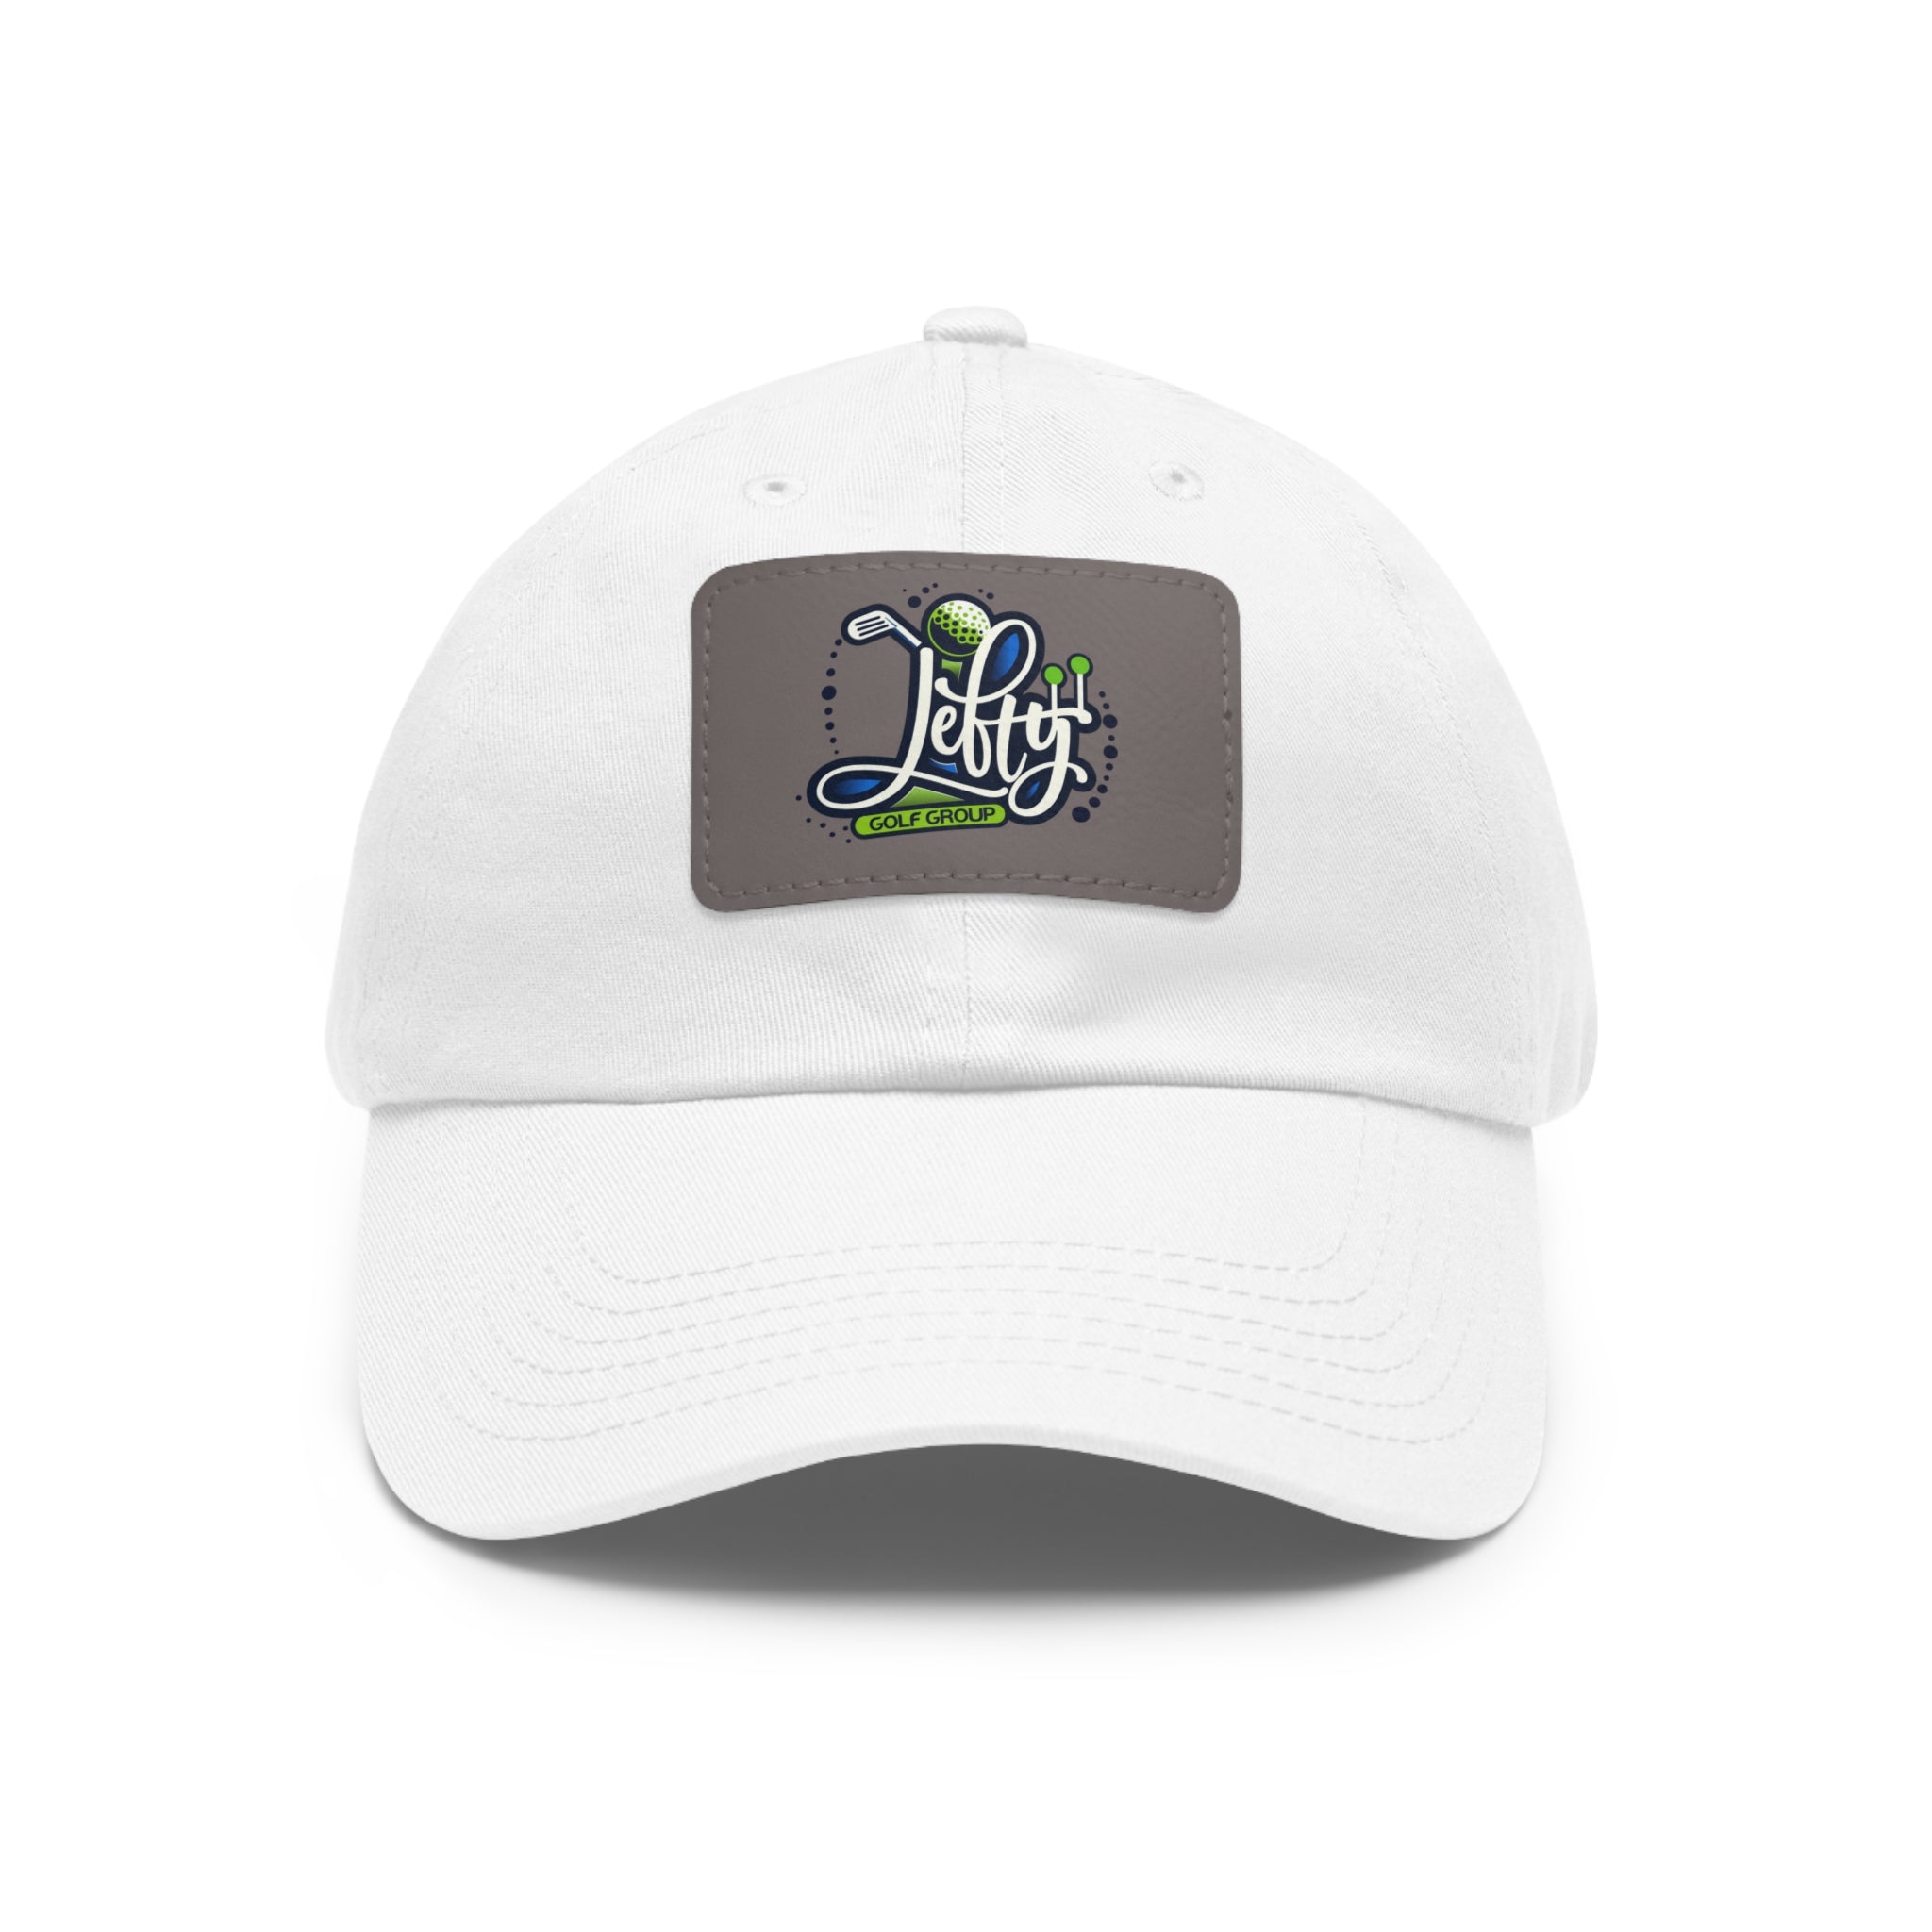 Lefty Golf Group Dad Hat w/ Leather Patch